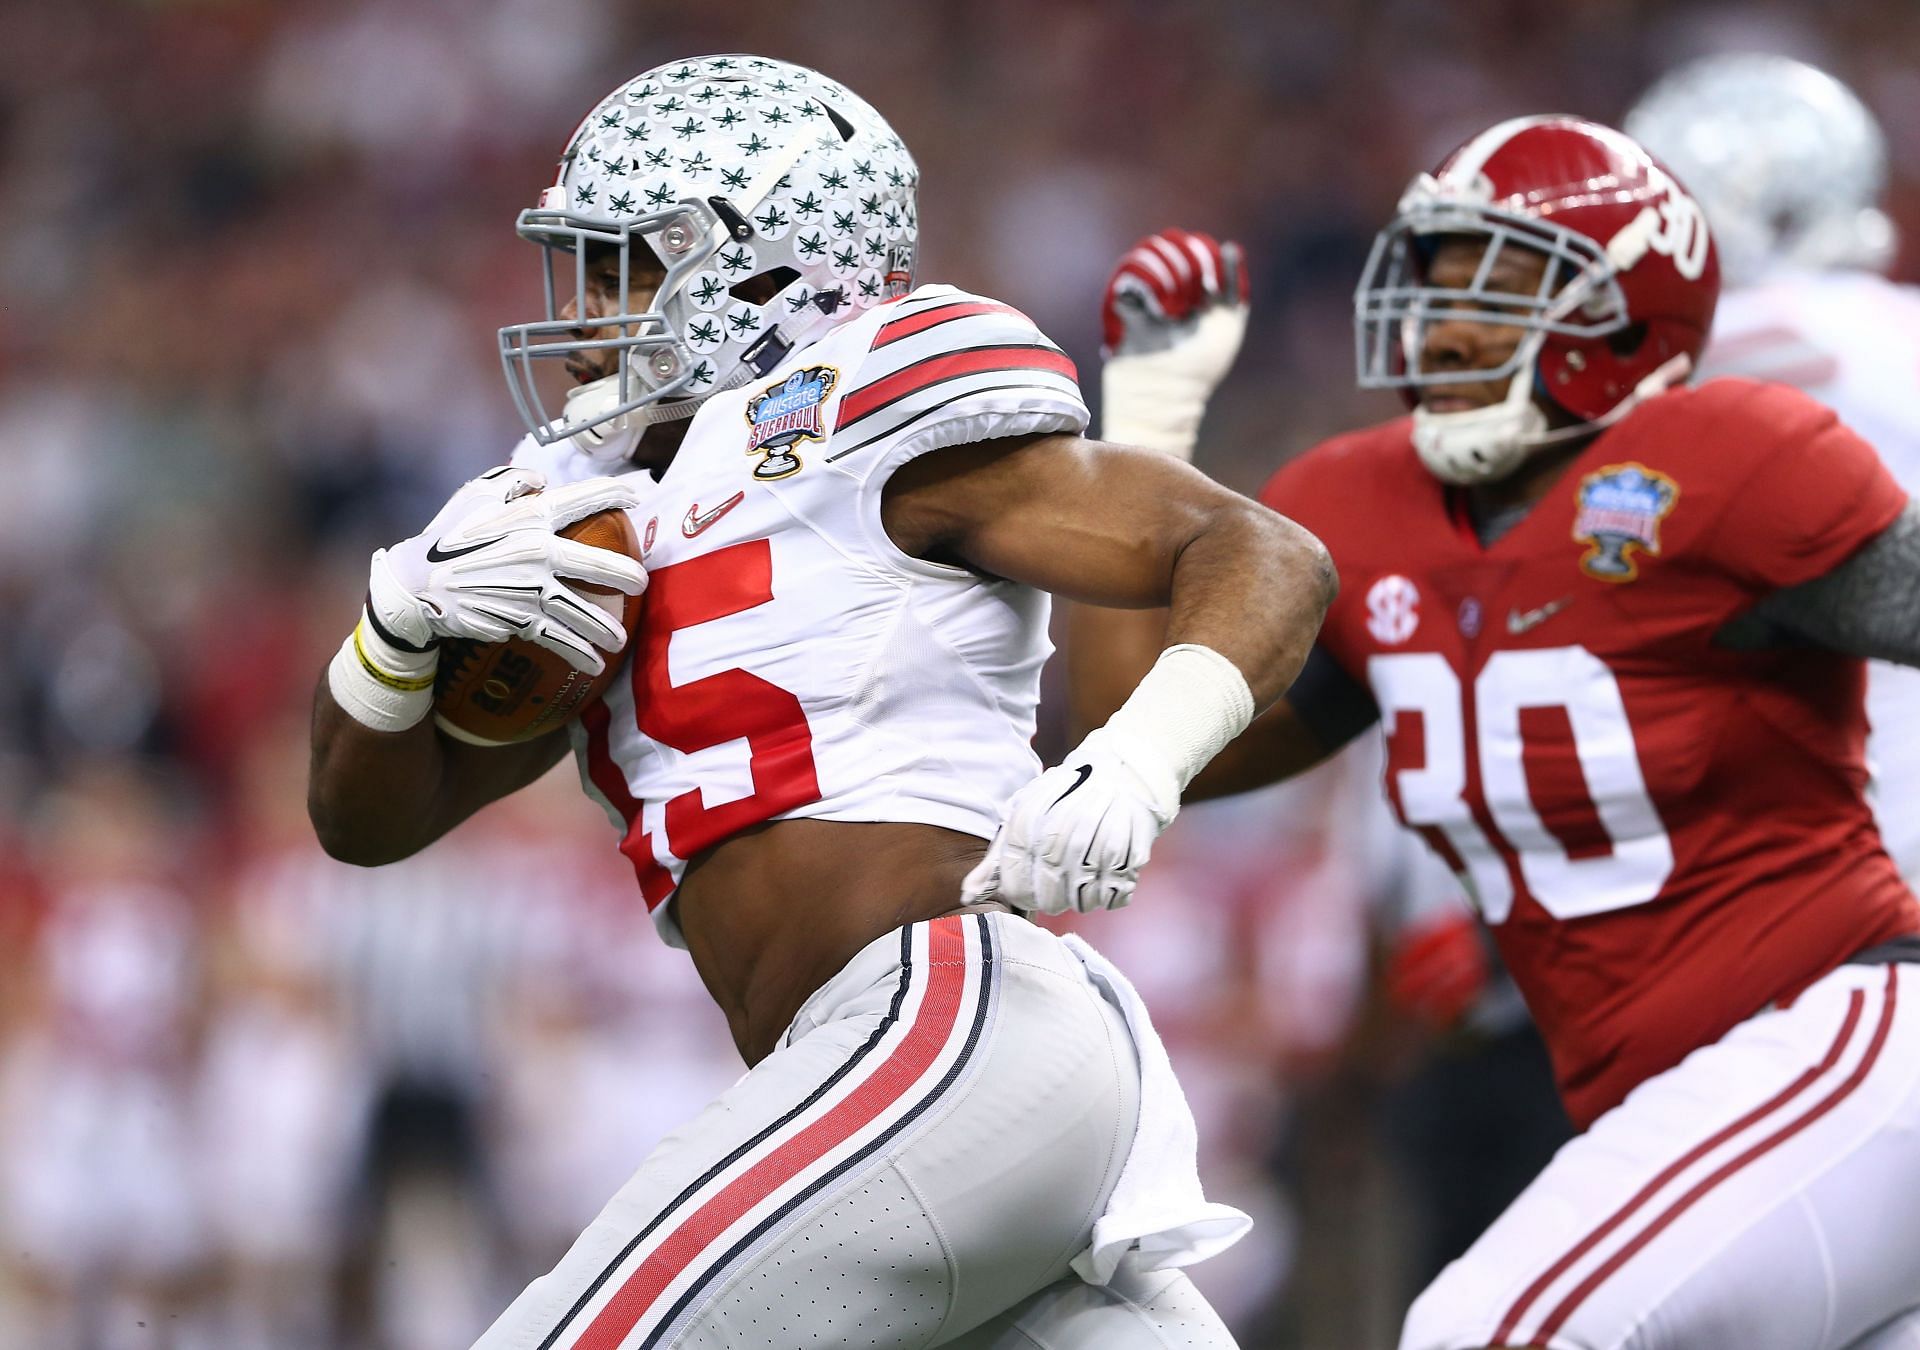 Ohio State last won the title in 2014 led by star RB Ezekiel Elliot